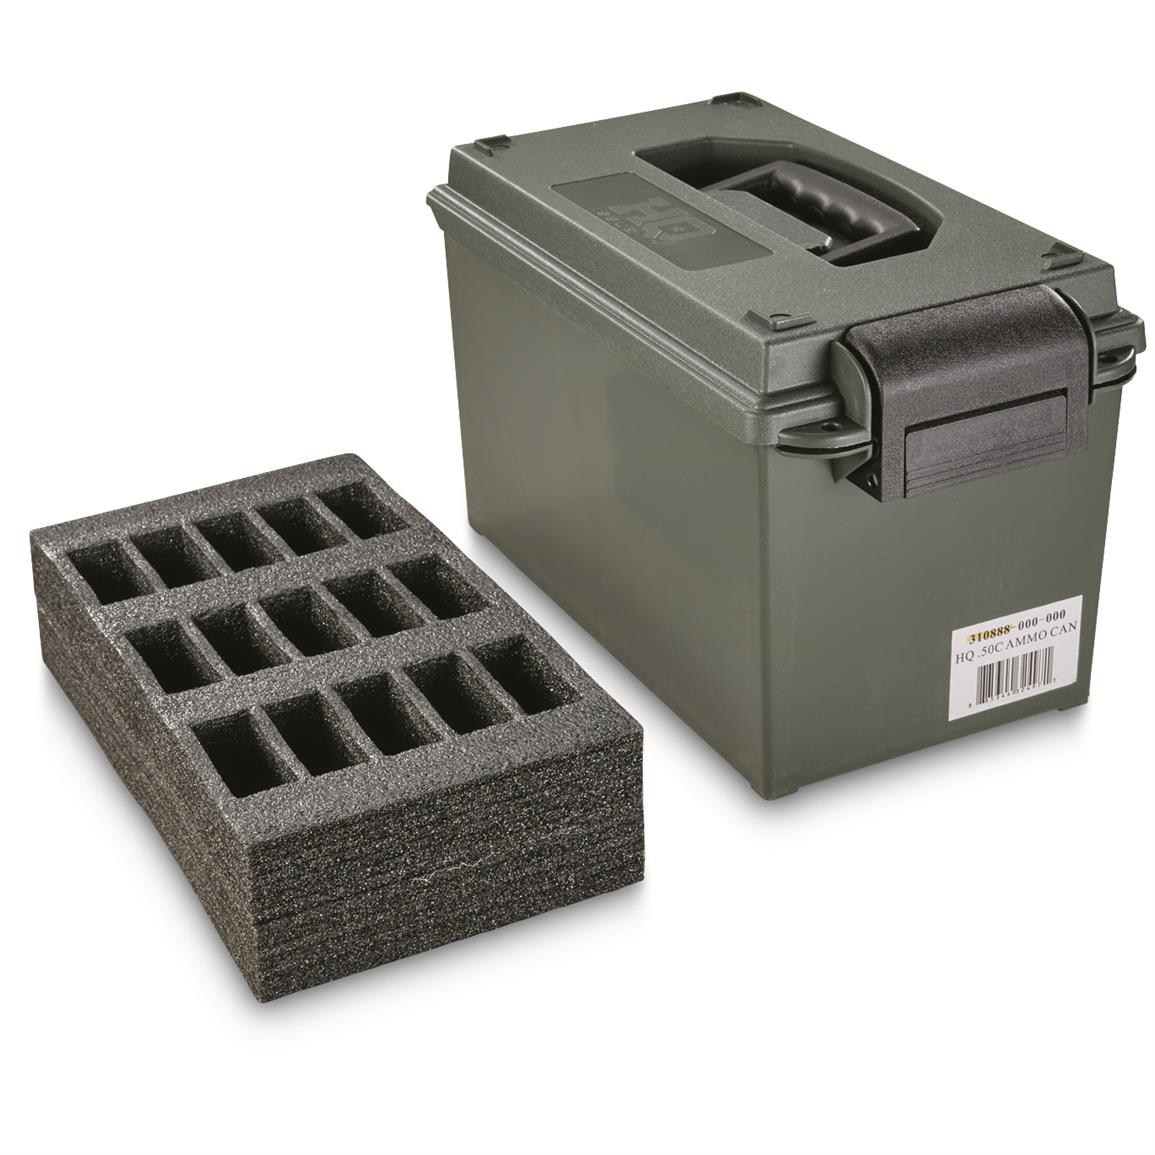 HQ Issue Tactical Magazine Can, .223/5.56 Caliber, Holds 15 Loaded 30 Round  Magazines - 676492, Ammo Boxes & Cans at Sportsman's Guide